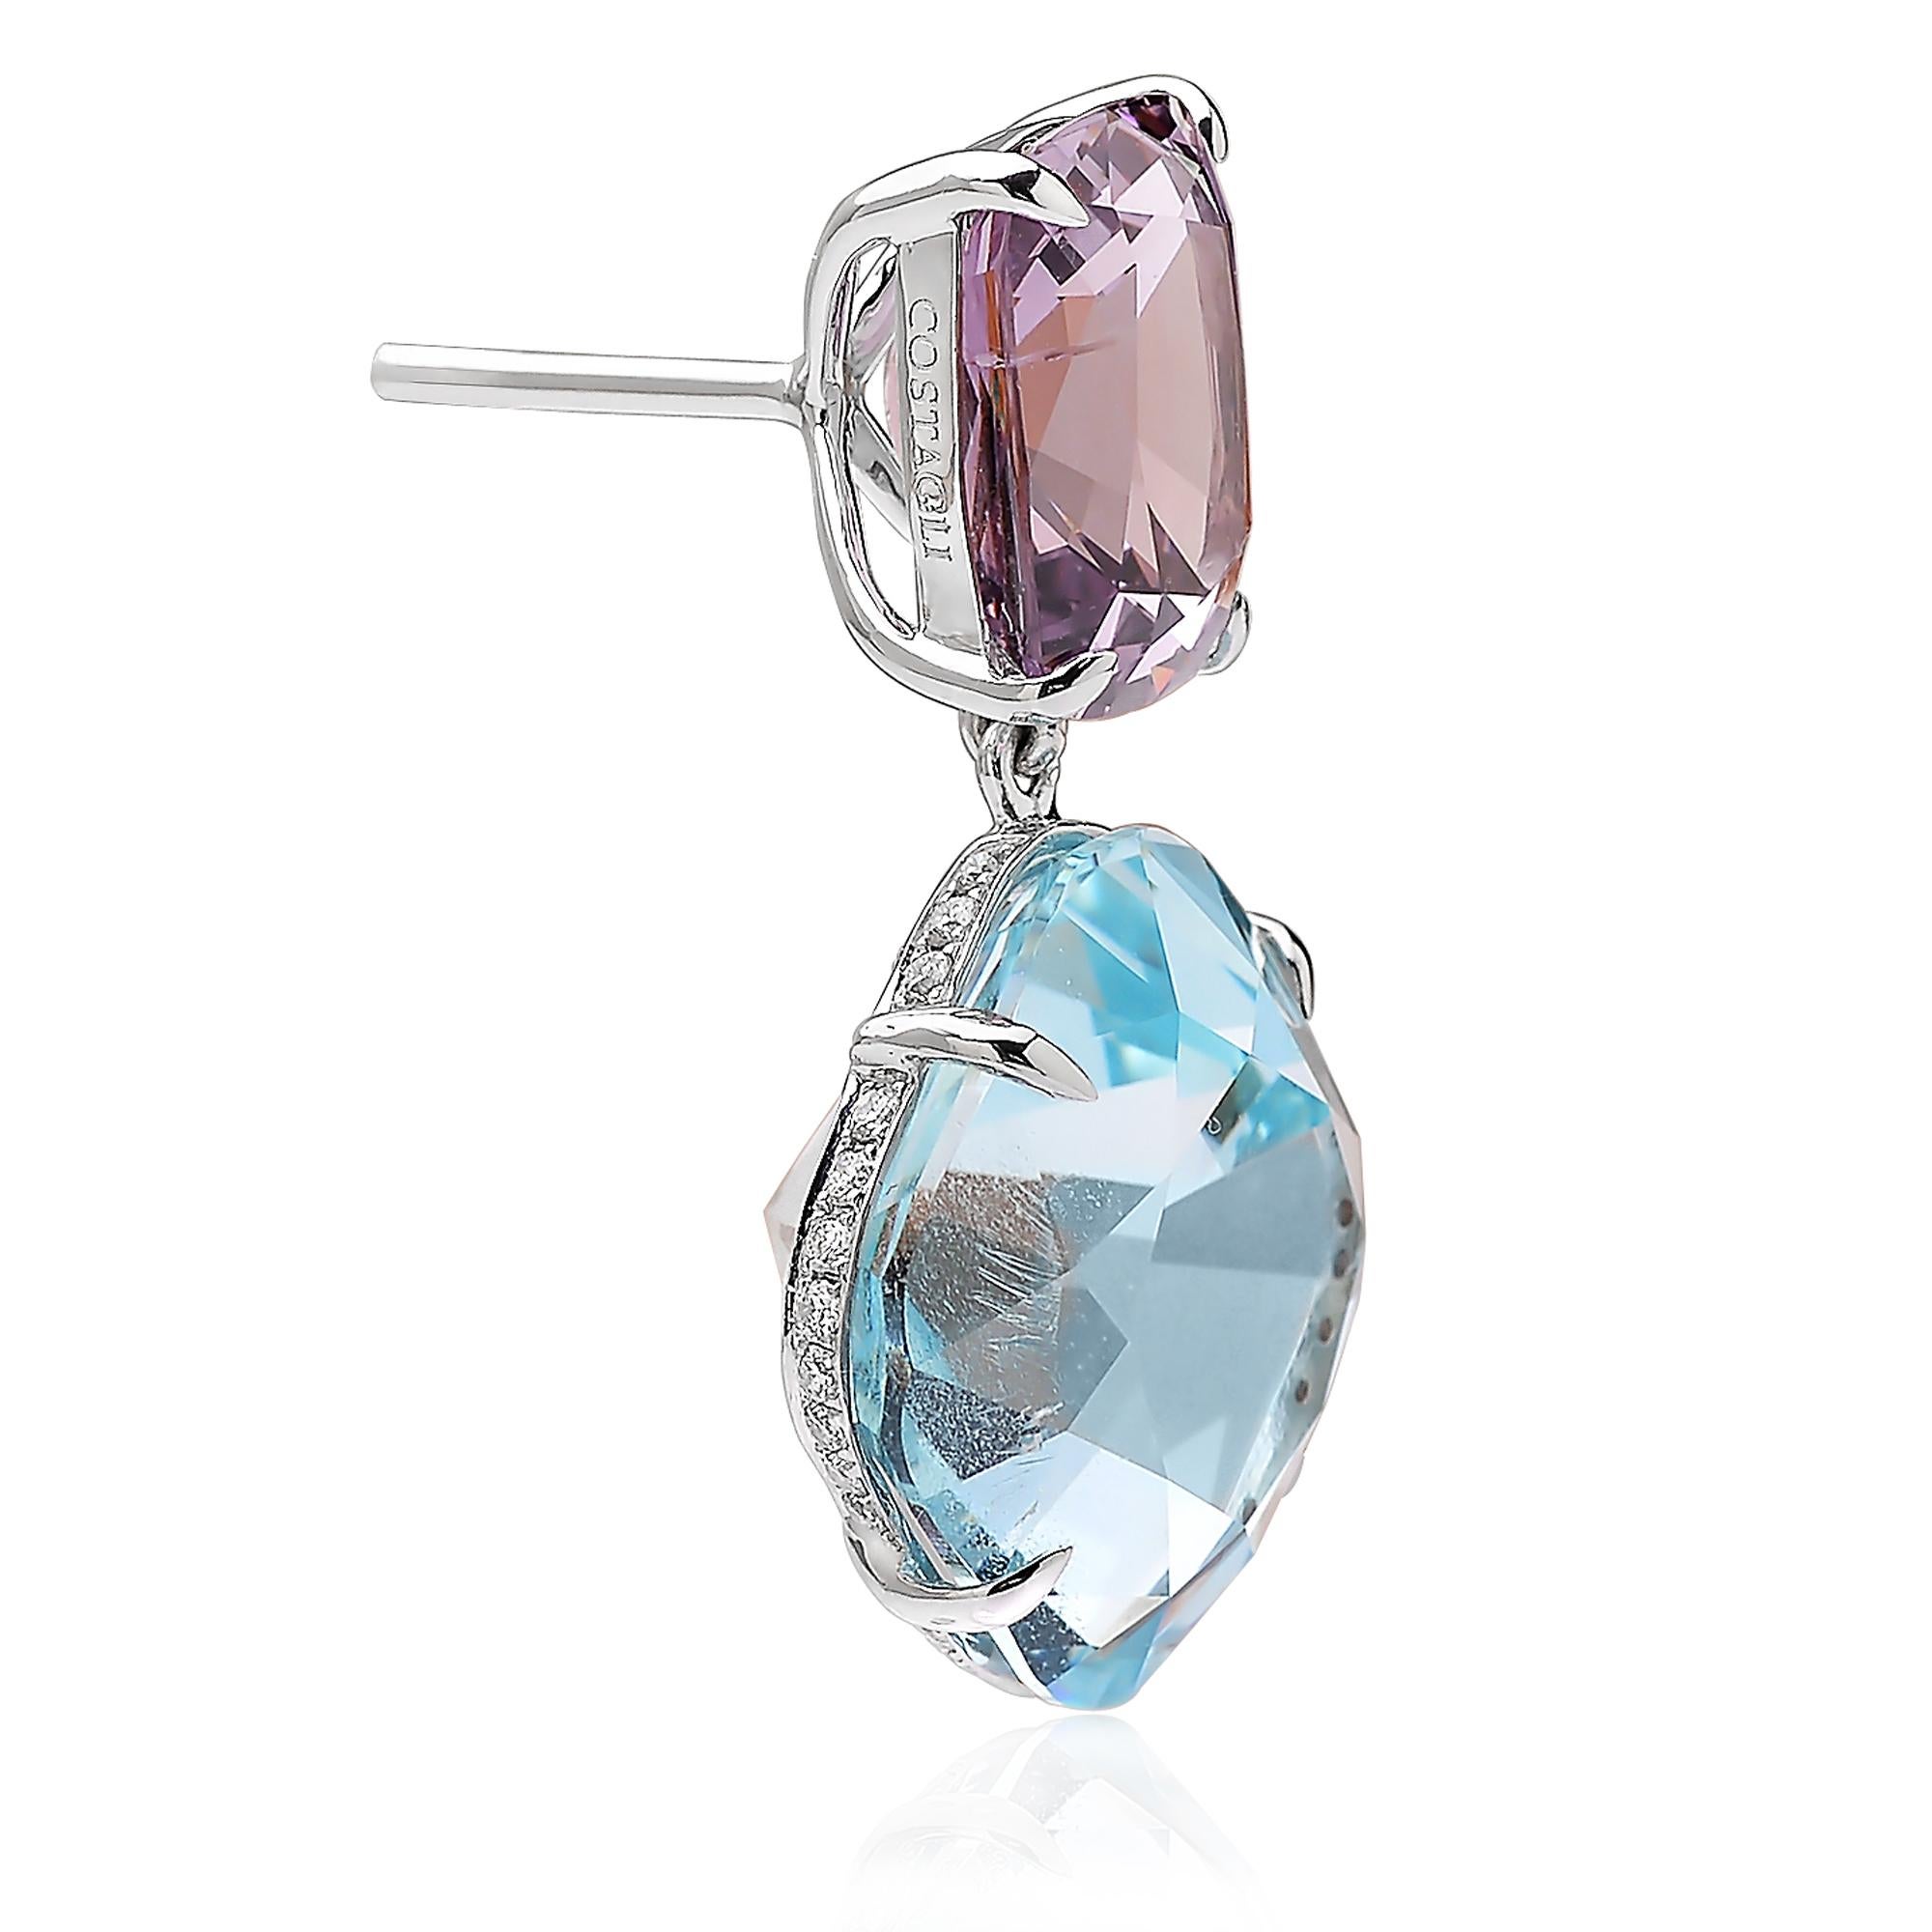 One of a kind aquamarine and spinel earrings set in 18 karat white gold with pave-set round, brilliant diamonds. 

Clean lines, great proportions and minimum weight were very carefully designed for the comfort of the wearer. 

Aquamarine: 13.03